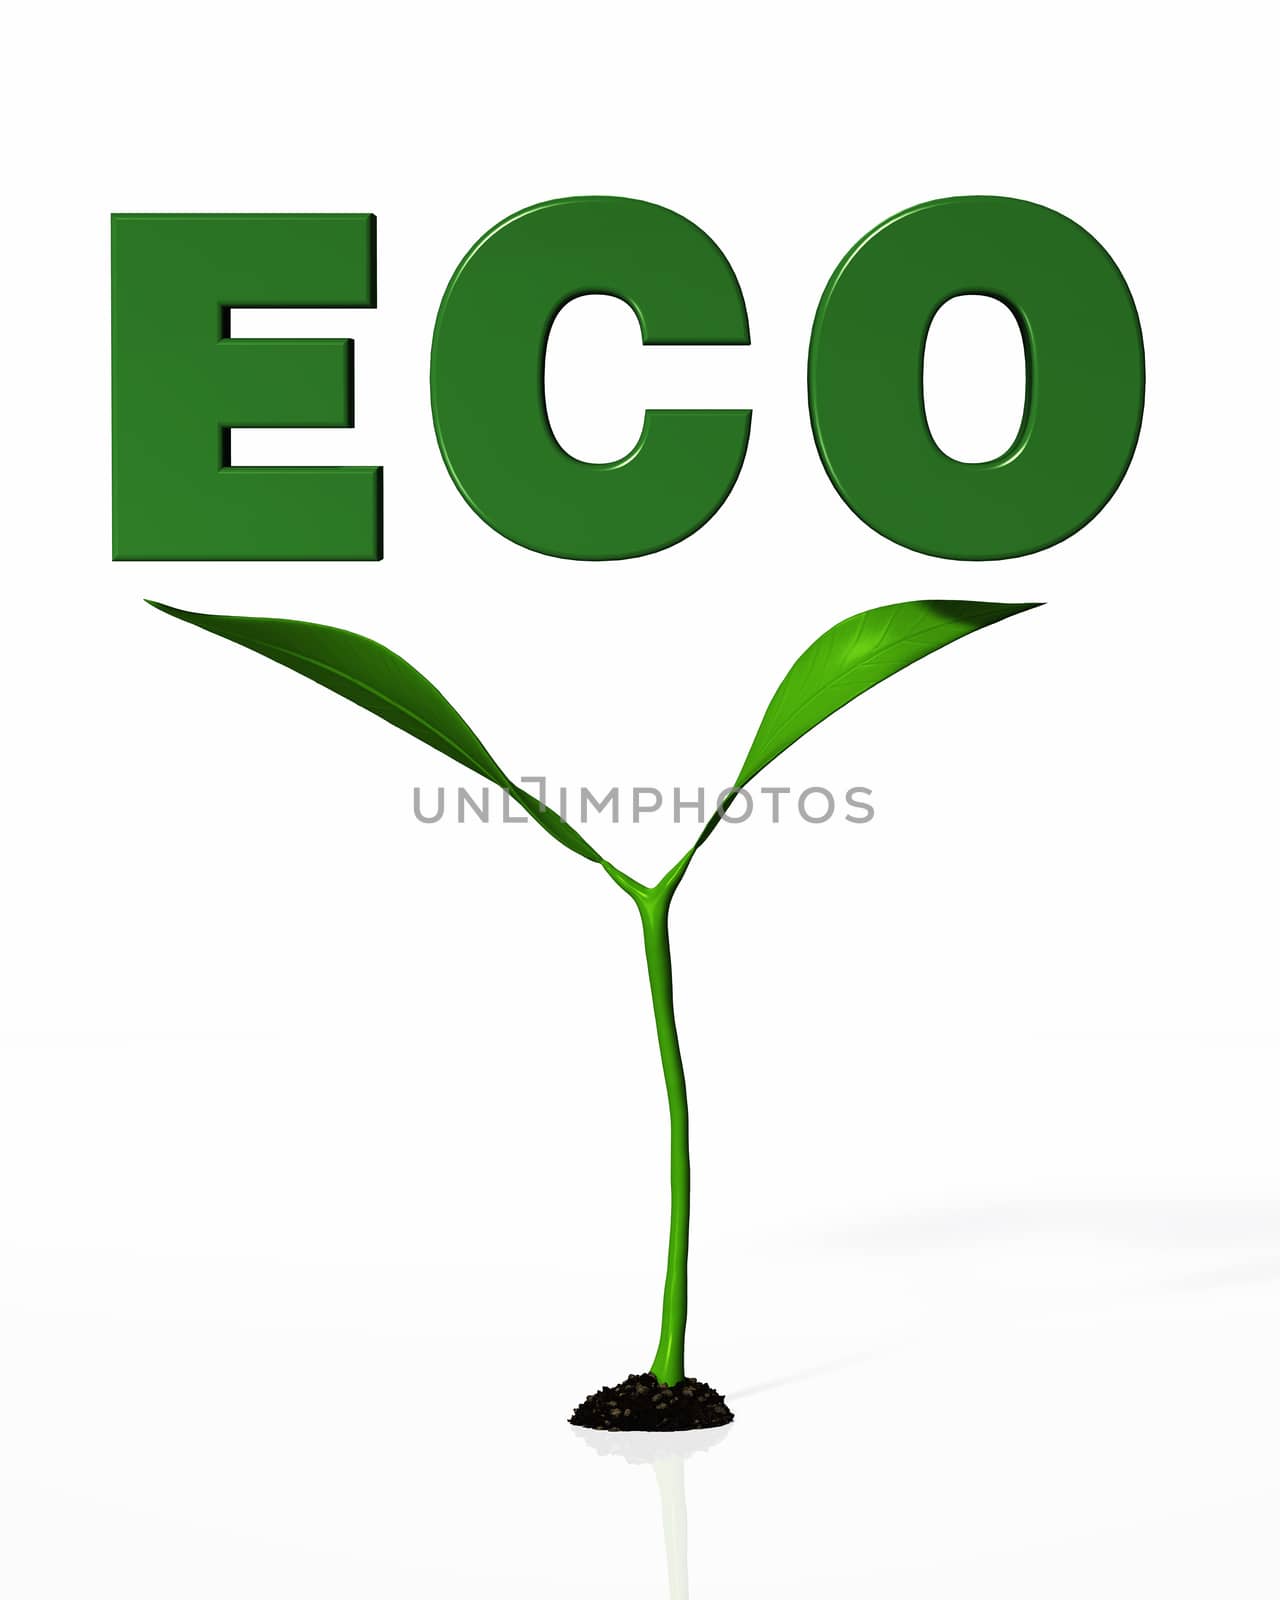 a young plant with some soil on the base in to a white ground has in suspended above its two leaves, a green word "ECO"